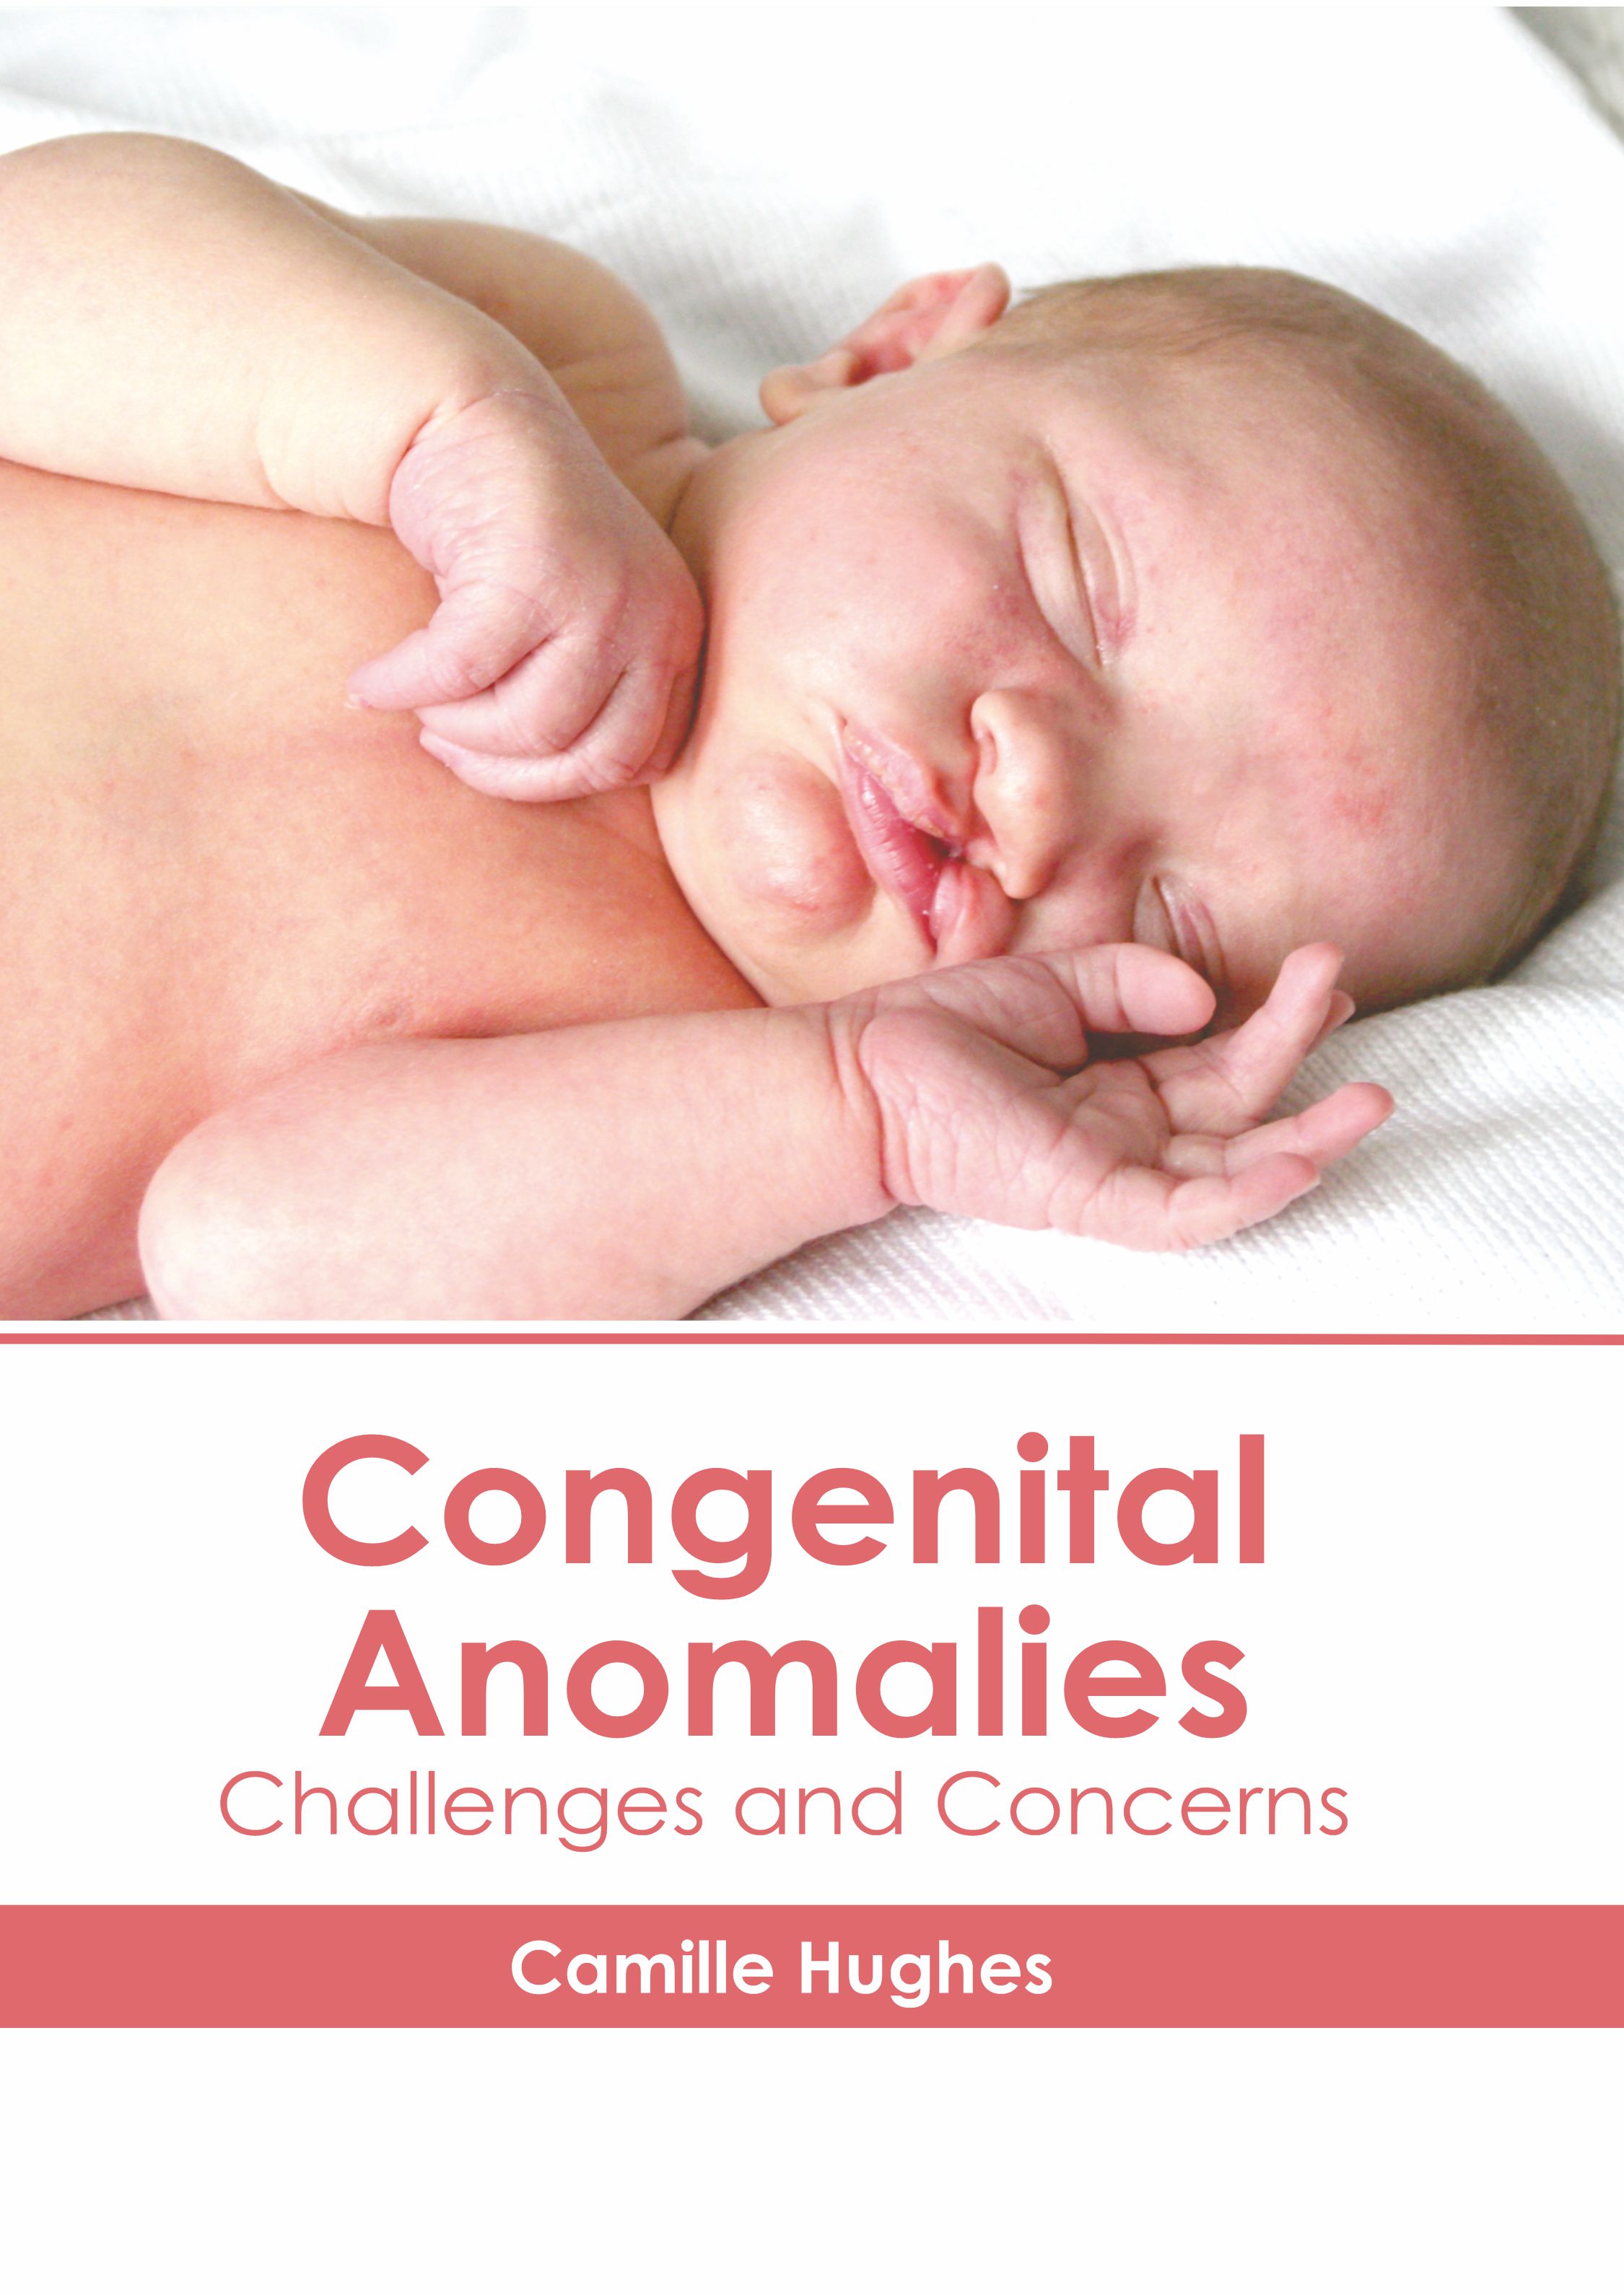 CONGENITAL ANOMALIES: CHALLENGES AND CONCERNS- ISBN: 9781639274192